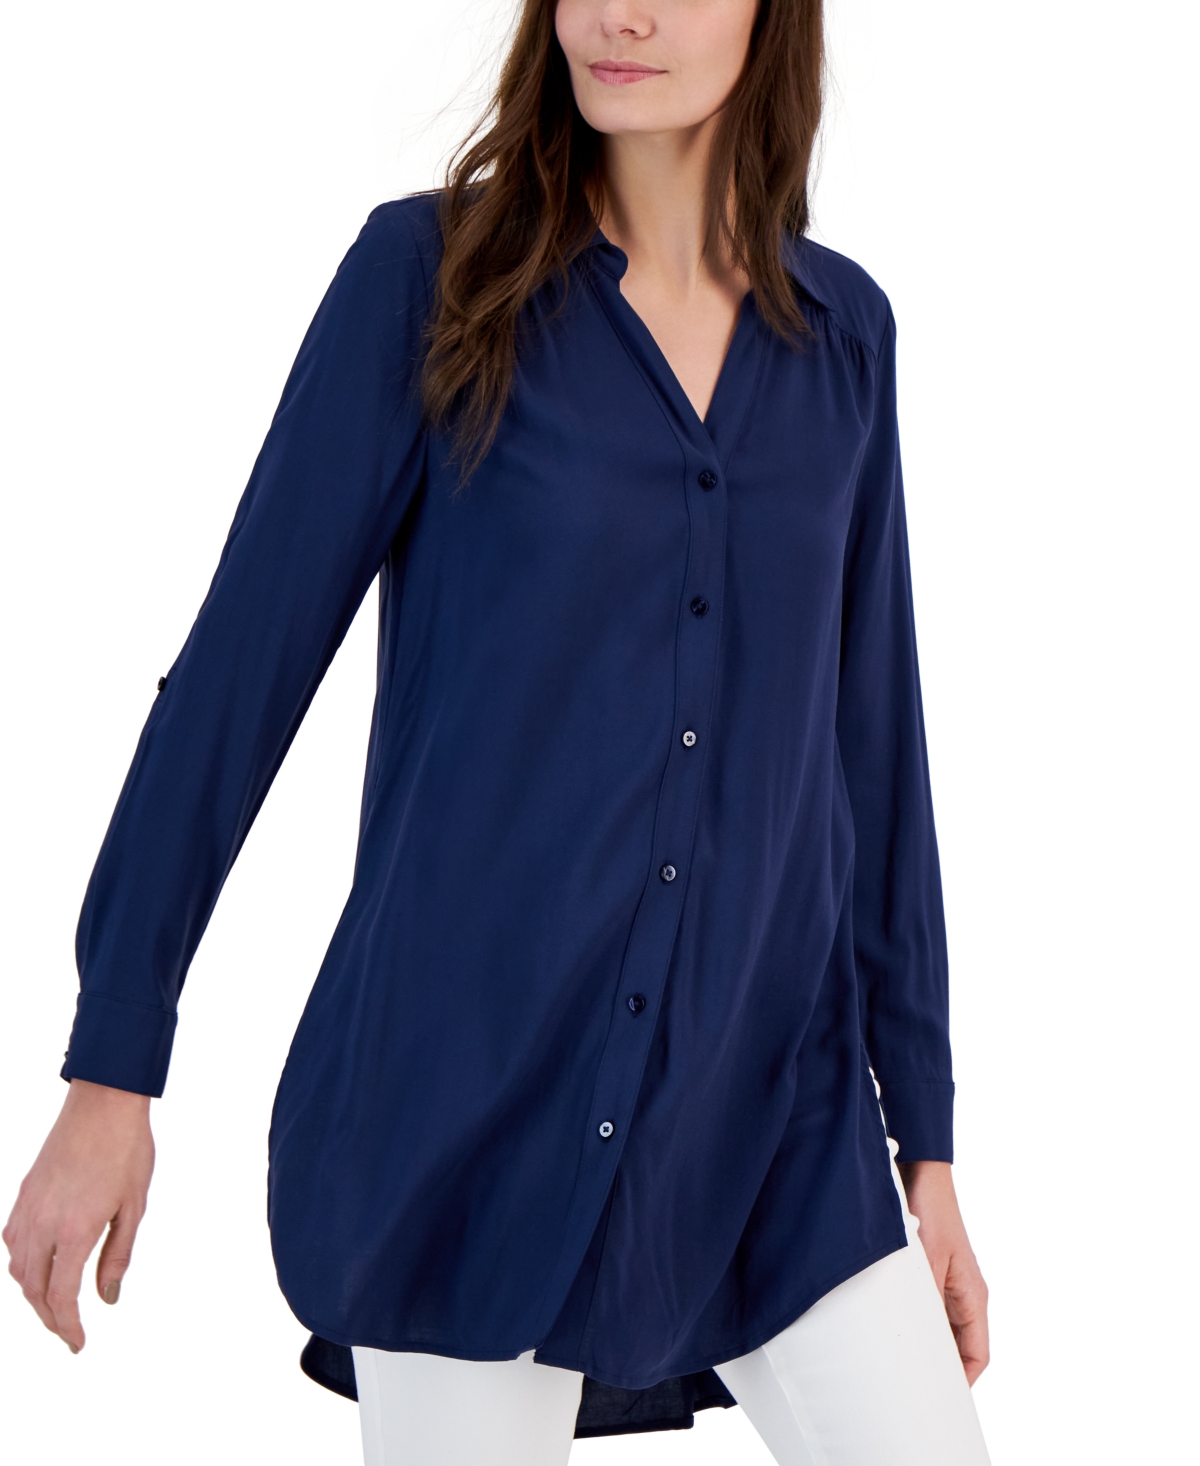 Women's Roll-Tab Button-Down Long Blouse, Created for Macy's - Indigo Sea